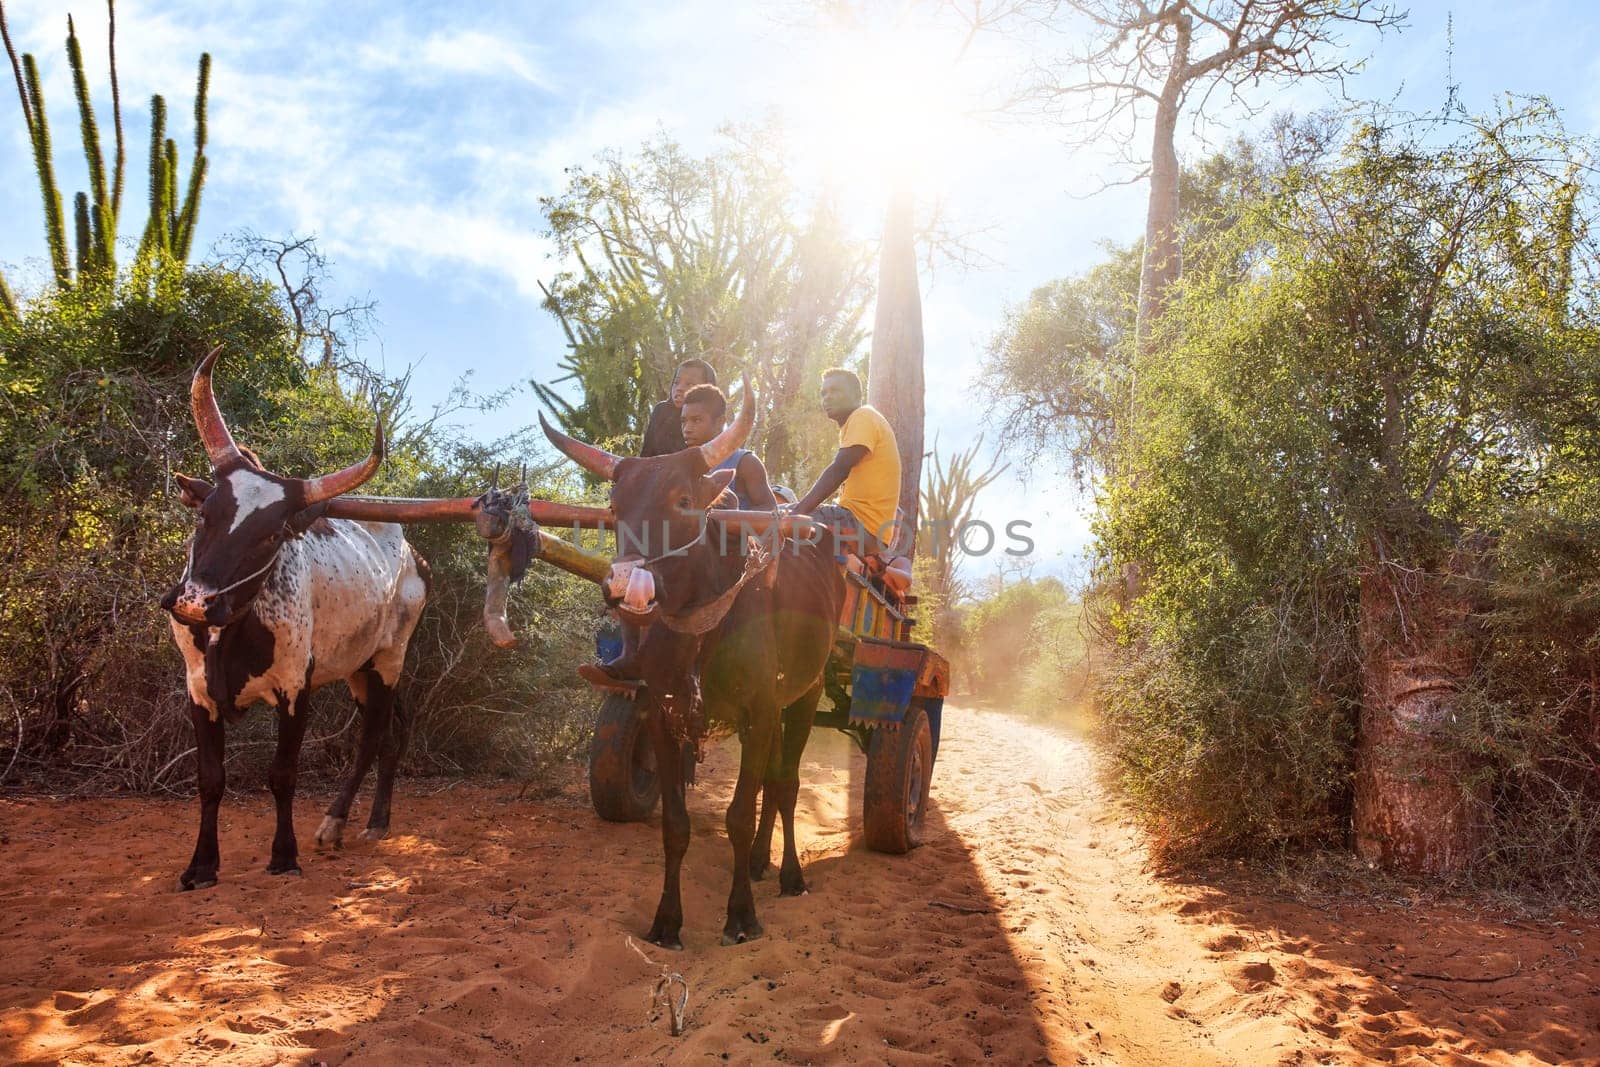 Ifaty, Madagascar - May 01, 2019: Wooden cart pulled by zebu cattle with unknown Malagasy men going near baobab, octopus trees, and small bushes, strong sun backlight by Ivanko